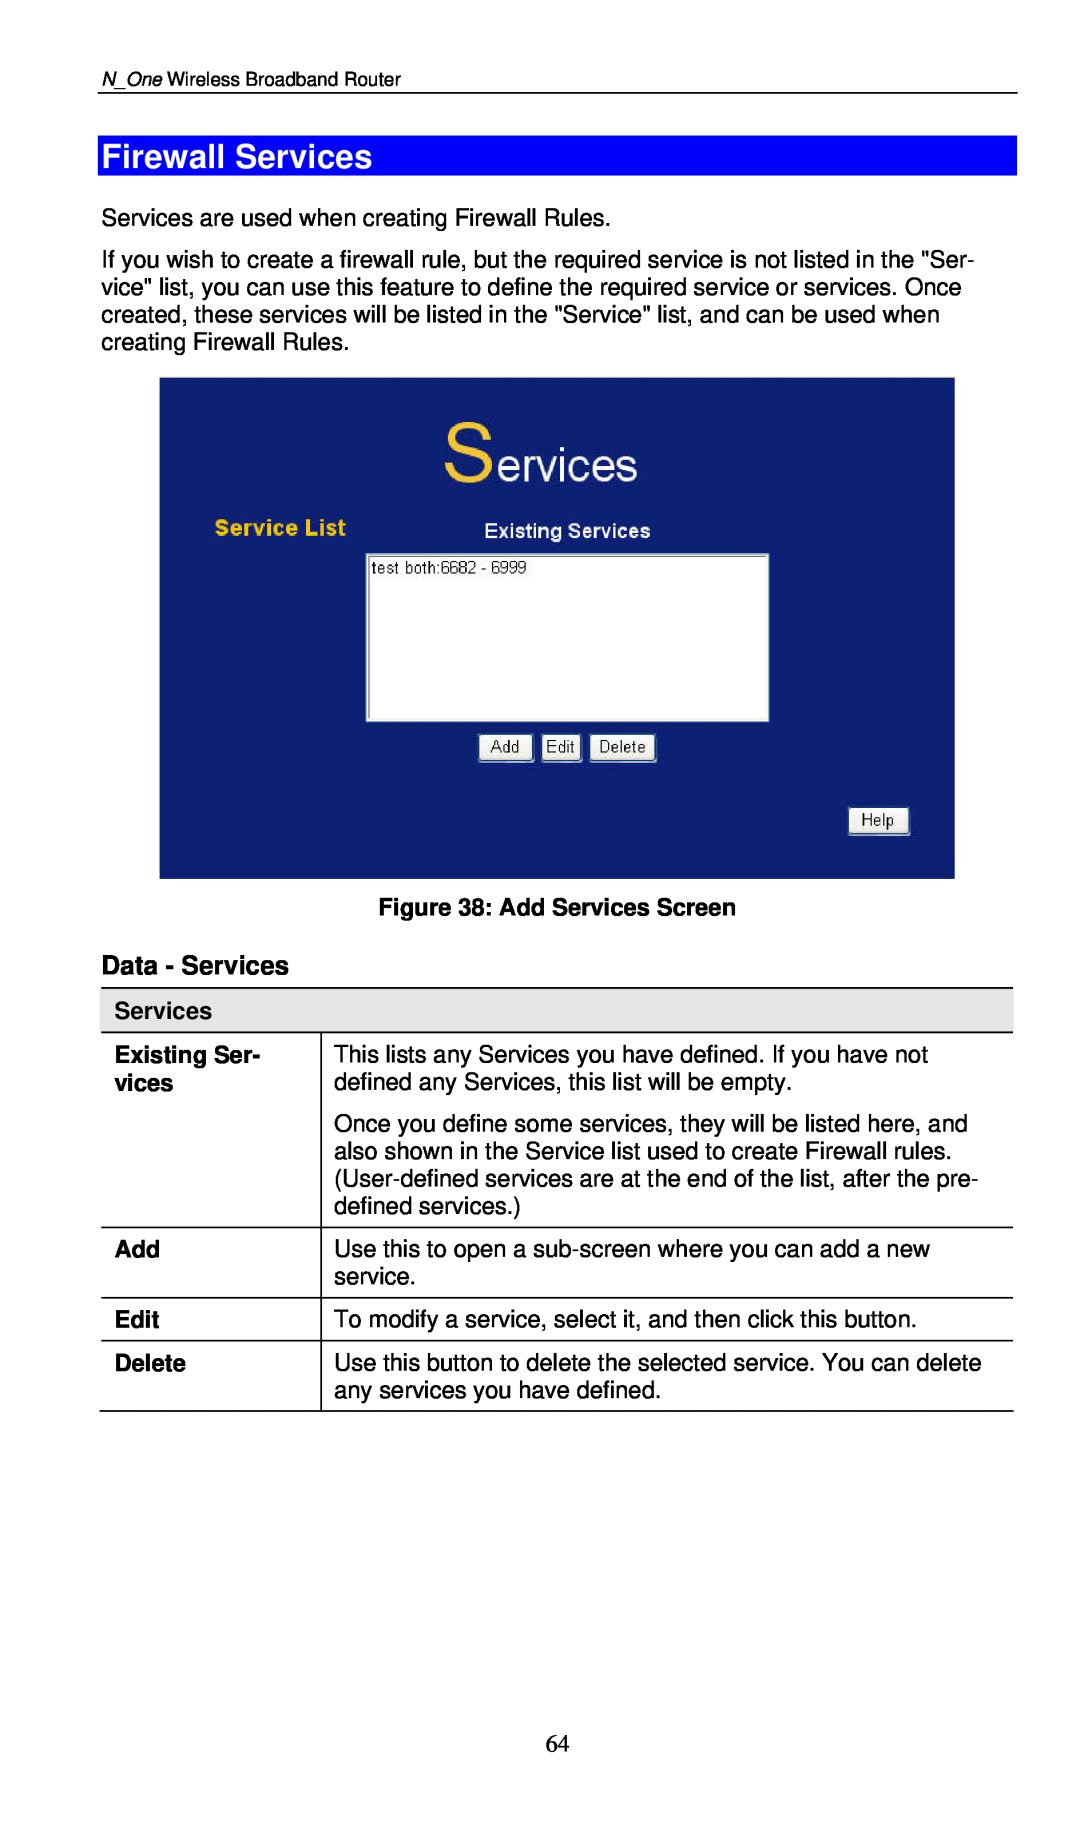 LevelOne WBR-6000 user manual Firewall Services, Add Services Screen, Existing Ser, Edit, Delete 